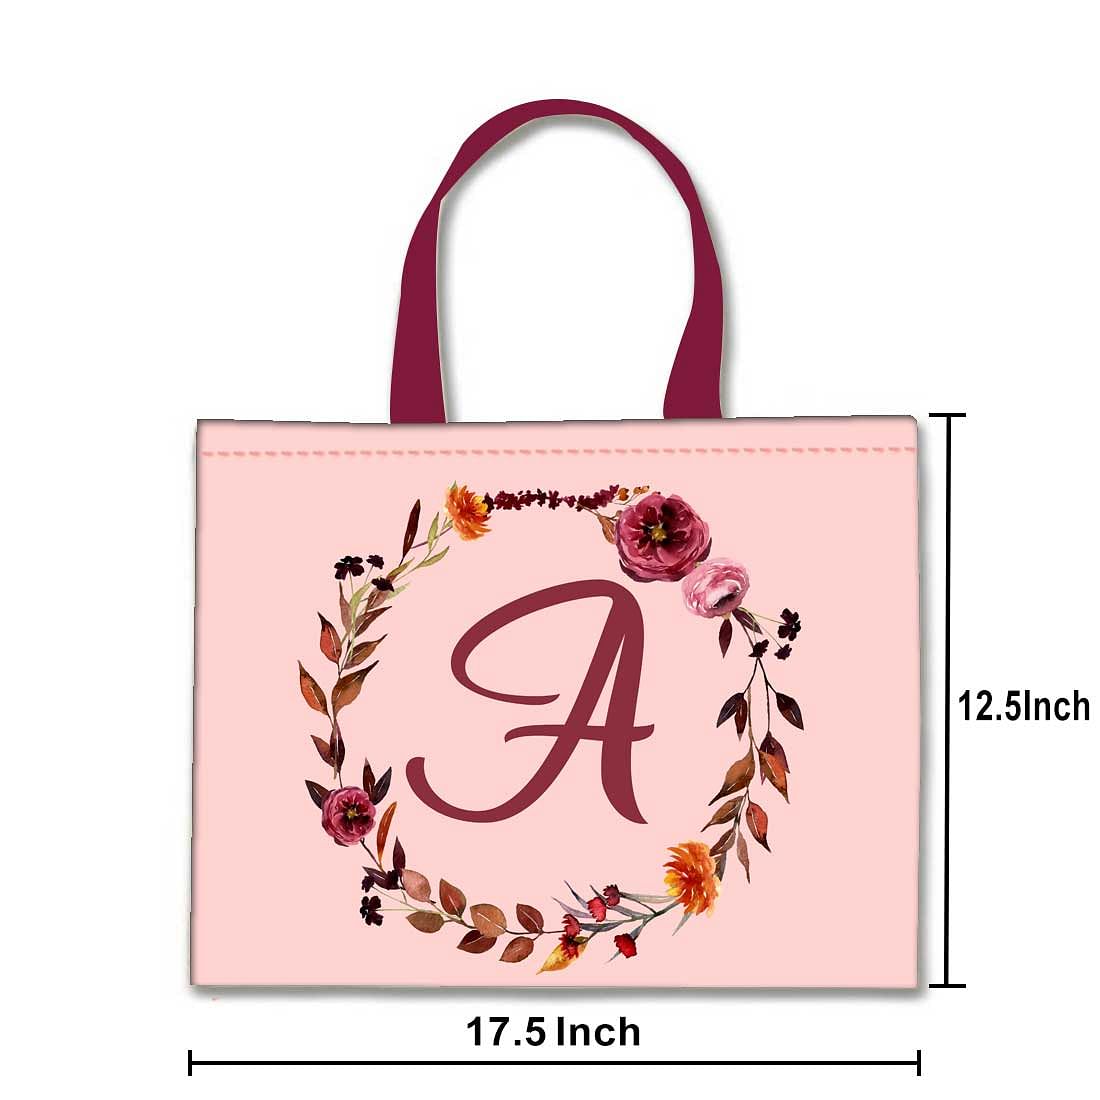 Promotional Personalized Bags Blank Plain Cotton Canvas Tote Bags Reusable  Shopping Cotton Bags | Bag mockup, Tote, Tote bag design